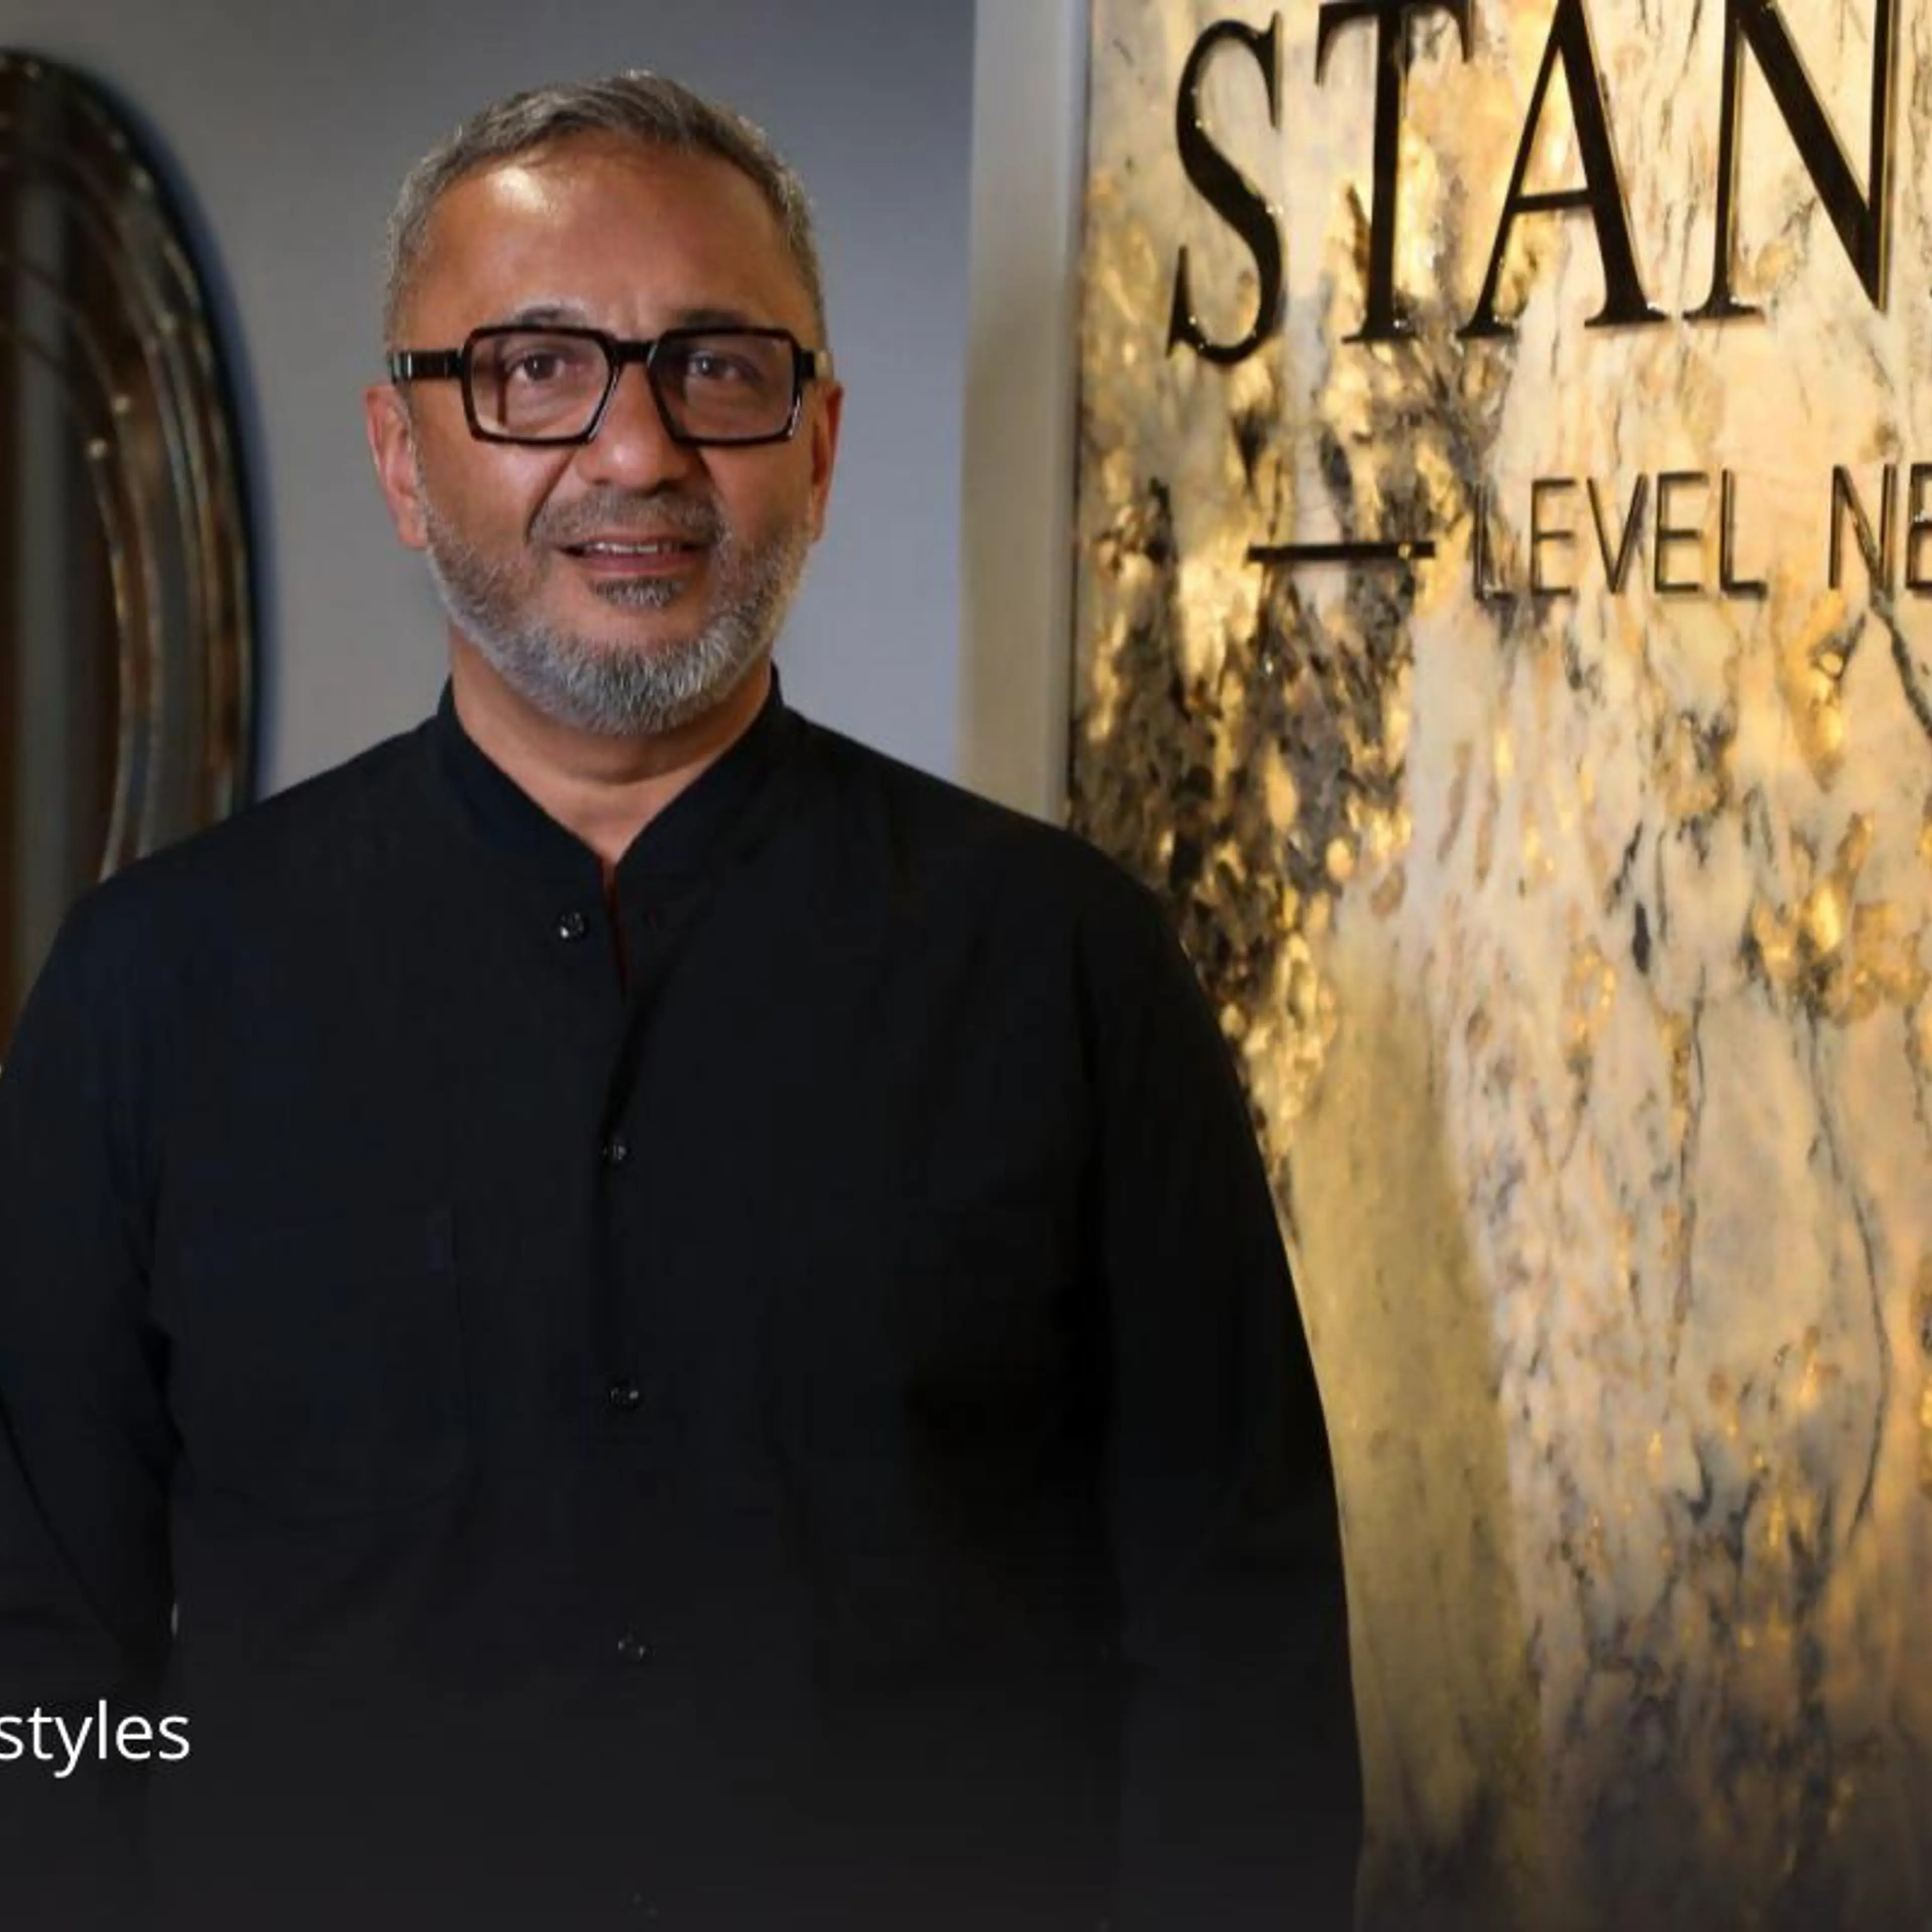 Luxury furniture brand Stanley’s rise from a garage to IPO dreams